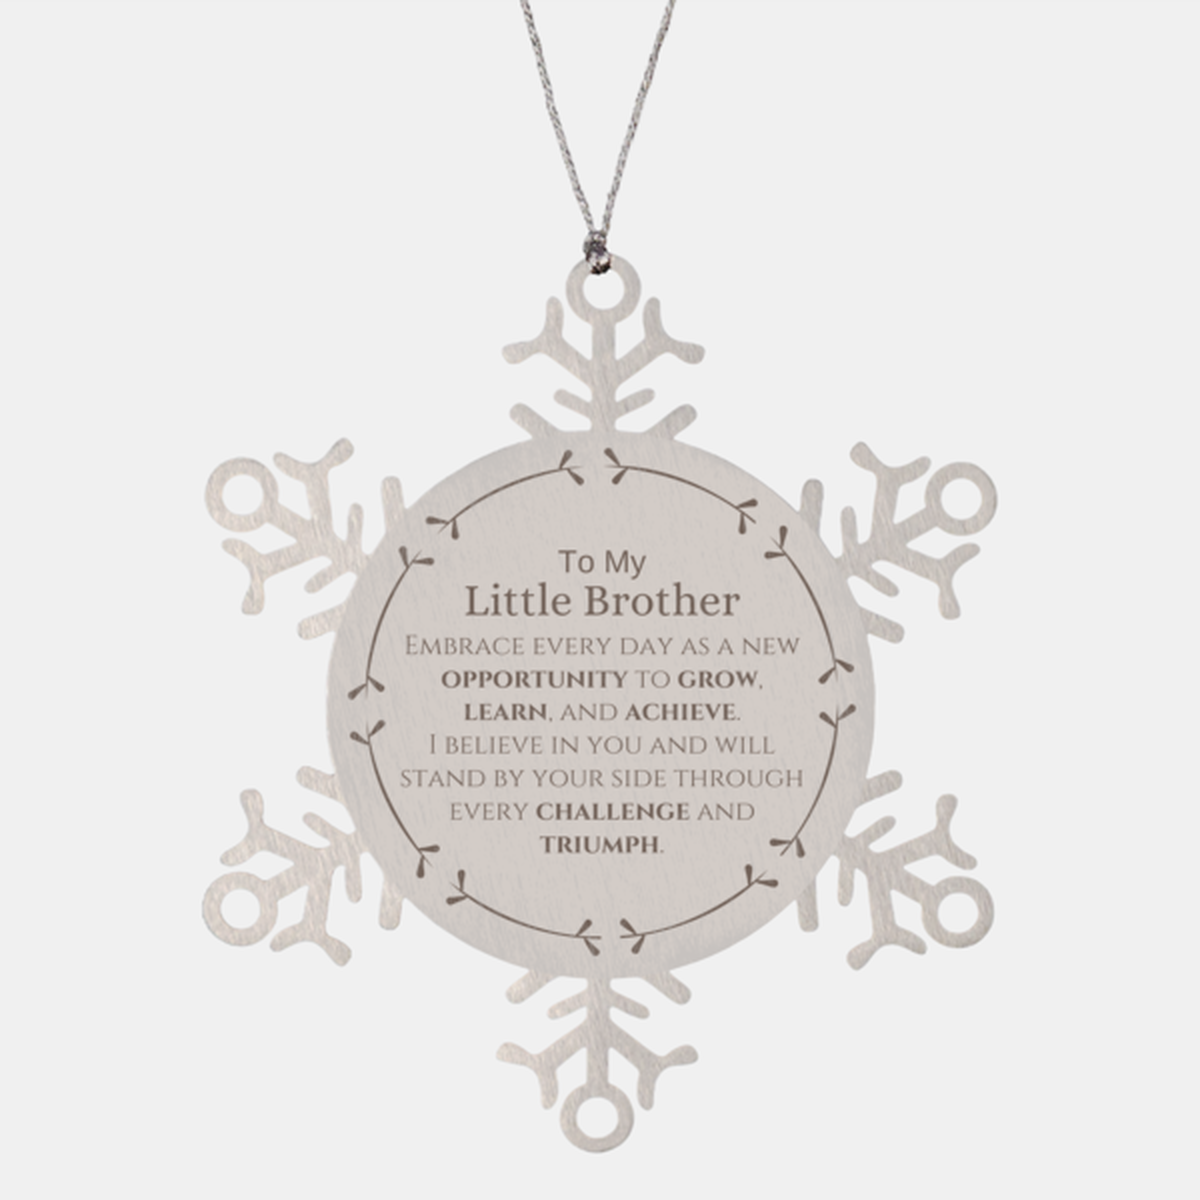 To My Little Brother Gifts, I believe in you and will stand by your side, Inspirational Snowflake Ornament For Little Brother, Birthday Christmas Motivational Little Brother Gifts